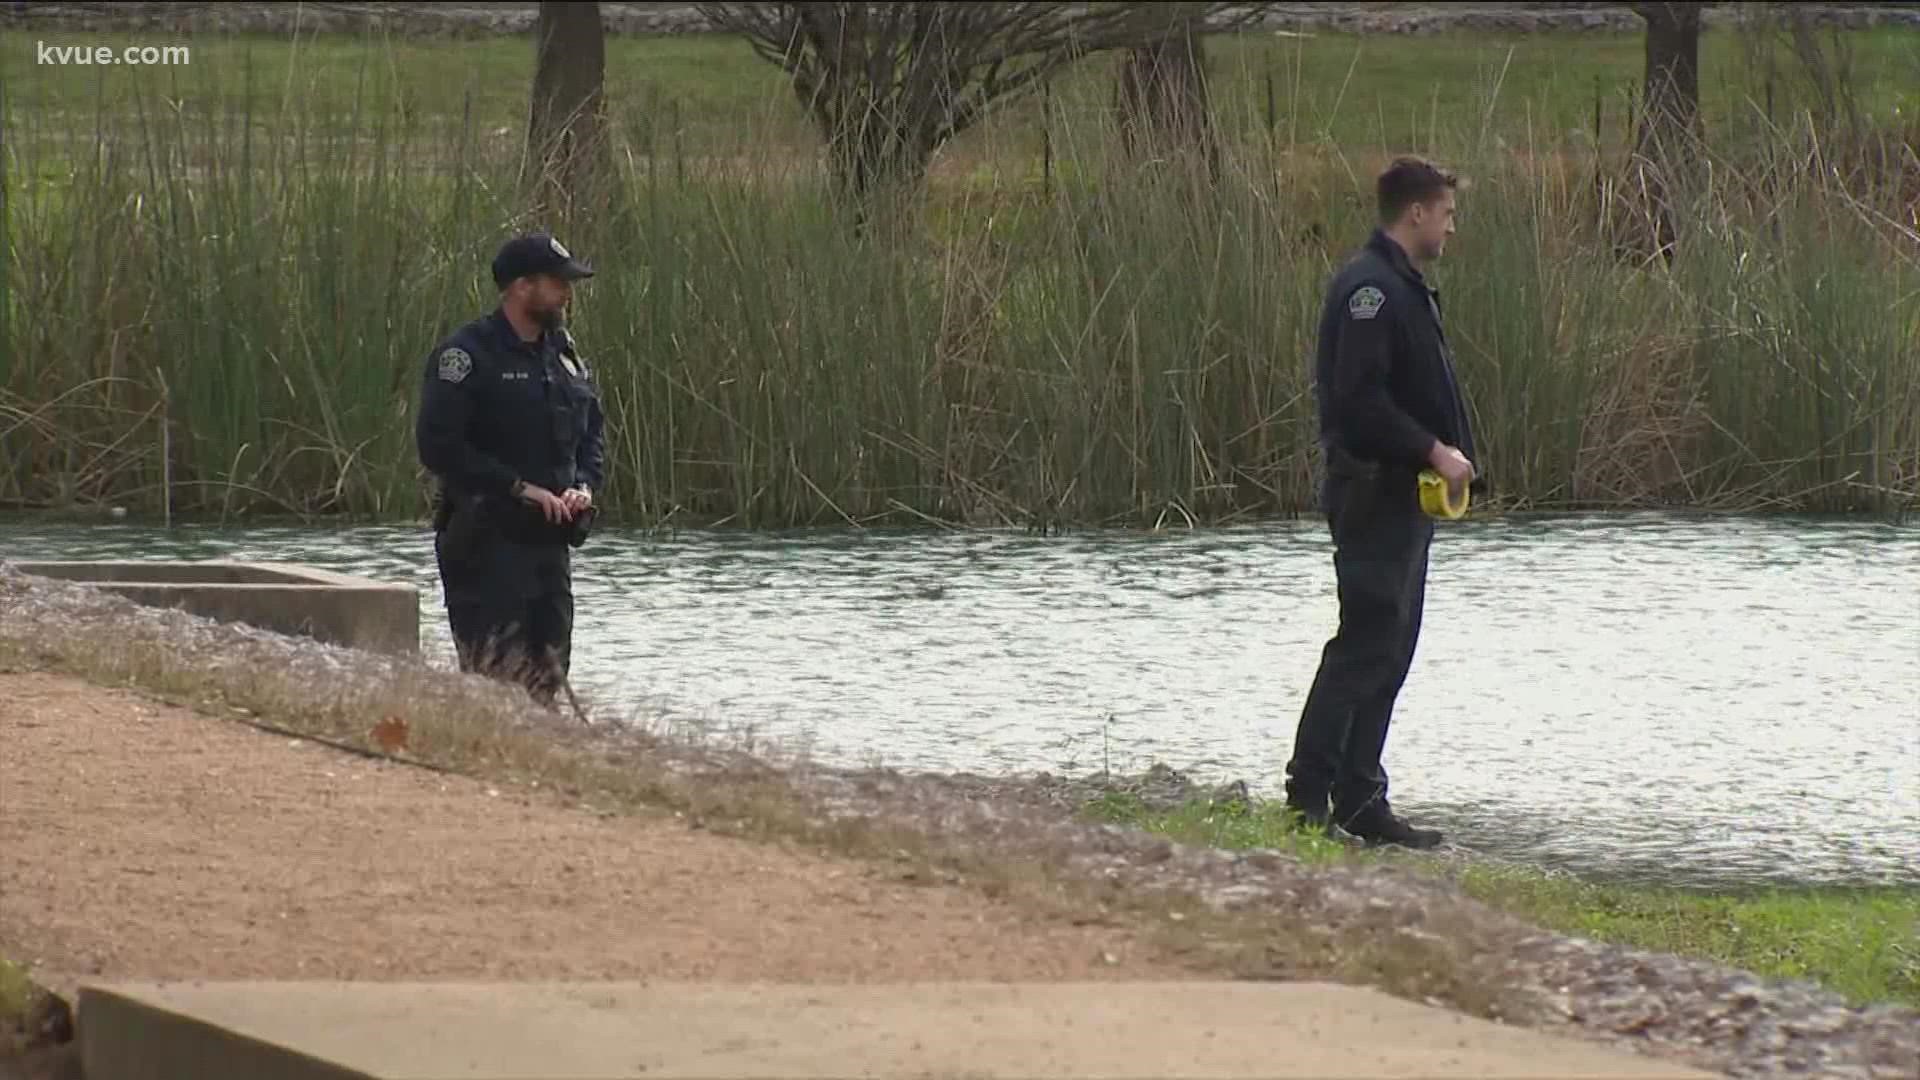 Police were on the scene after a body was found near hotels in North Austin on Saturday afternoon.